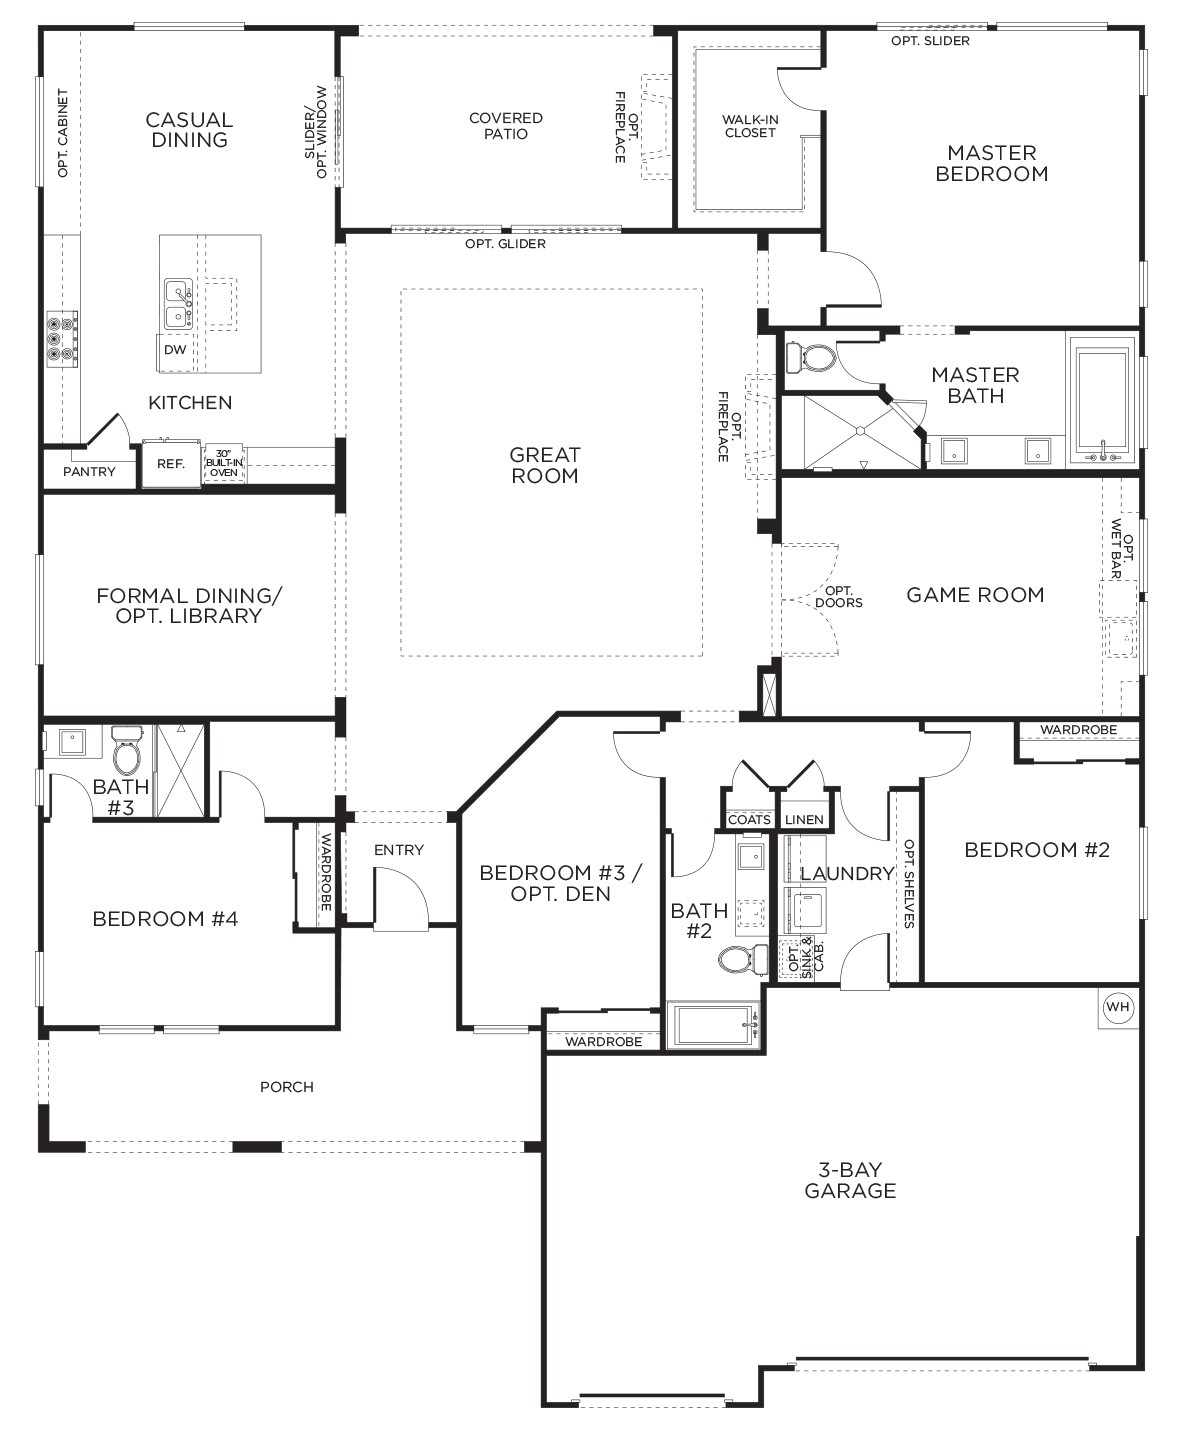 1 Story Home Plans Love This Layout with Extra Rooms Single Story Floor